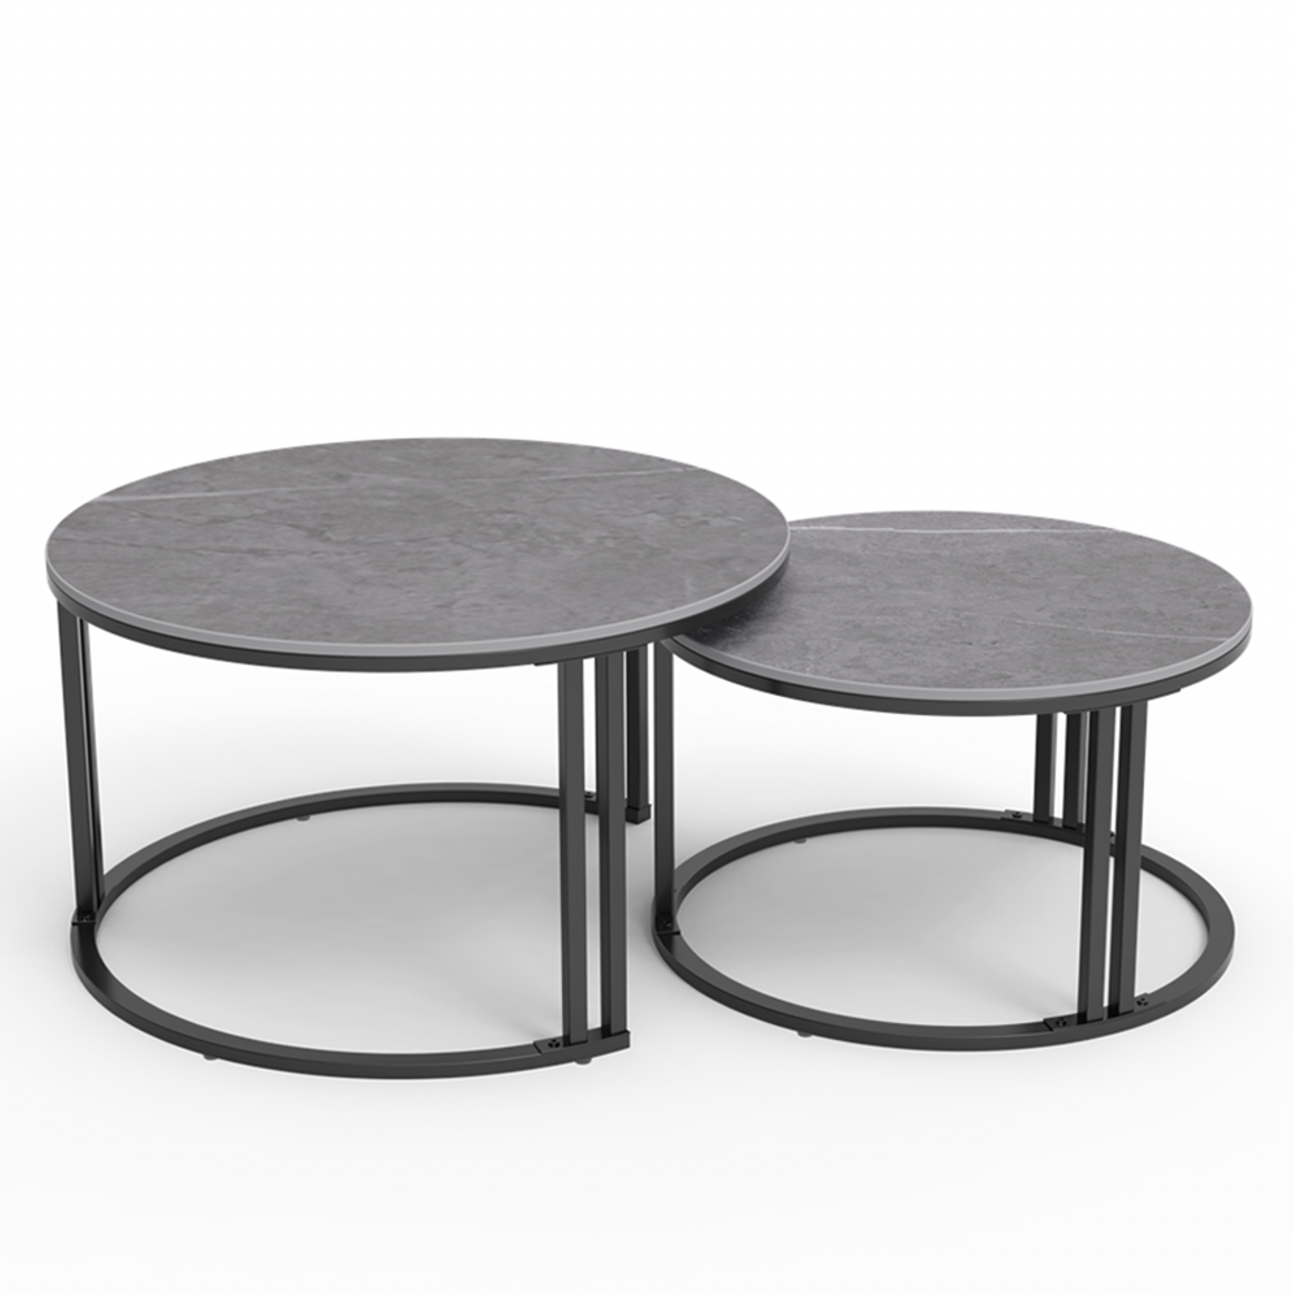 Interior Ave - Premier Grey Stone Nested Coffee Table Set